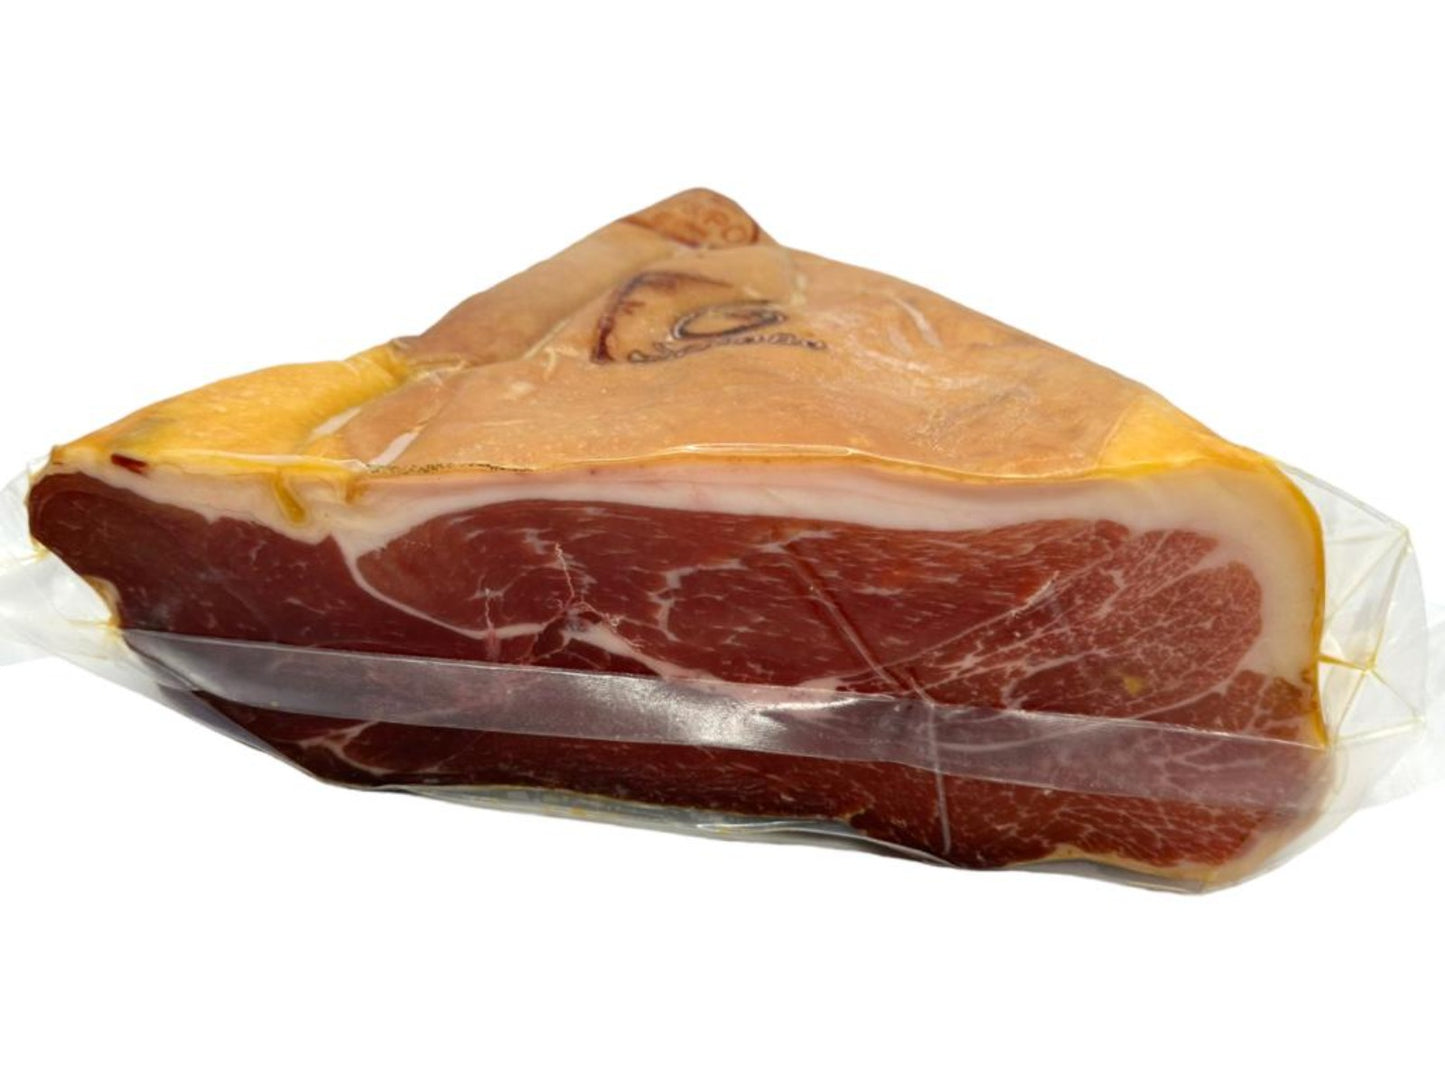 Espana y Hijos Jamon Serrano Half Leg random weight approx. 2kg packet. Regular price $75.00 [You are guaranteed to receive at least 1.950kg of product, equivalent price of $38.46 per kg.]